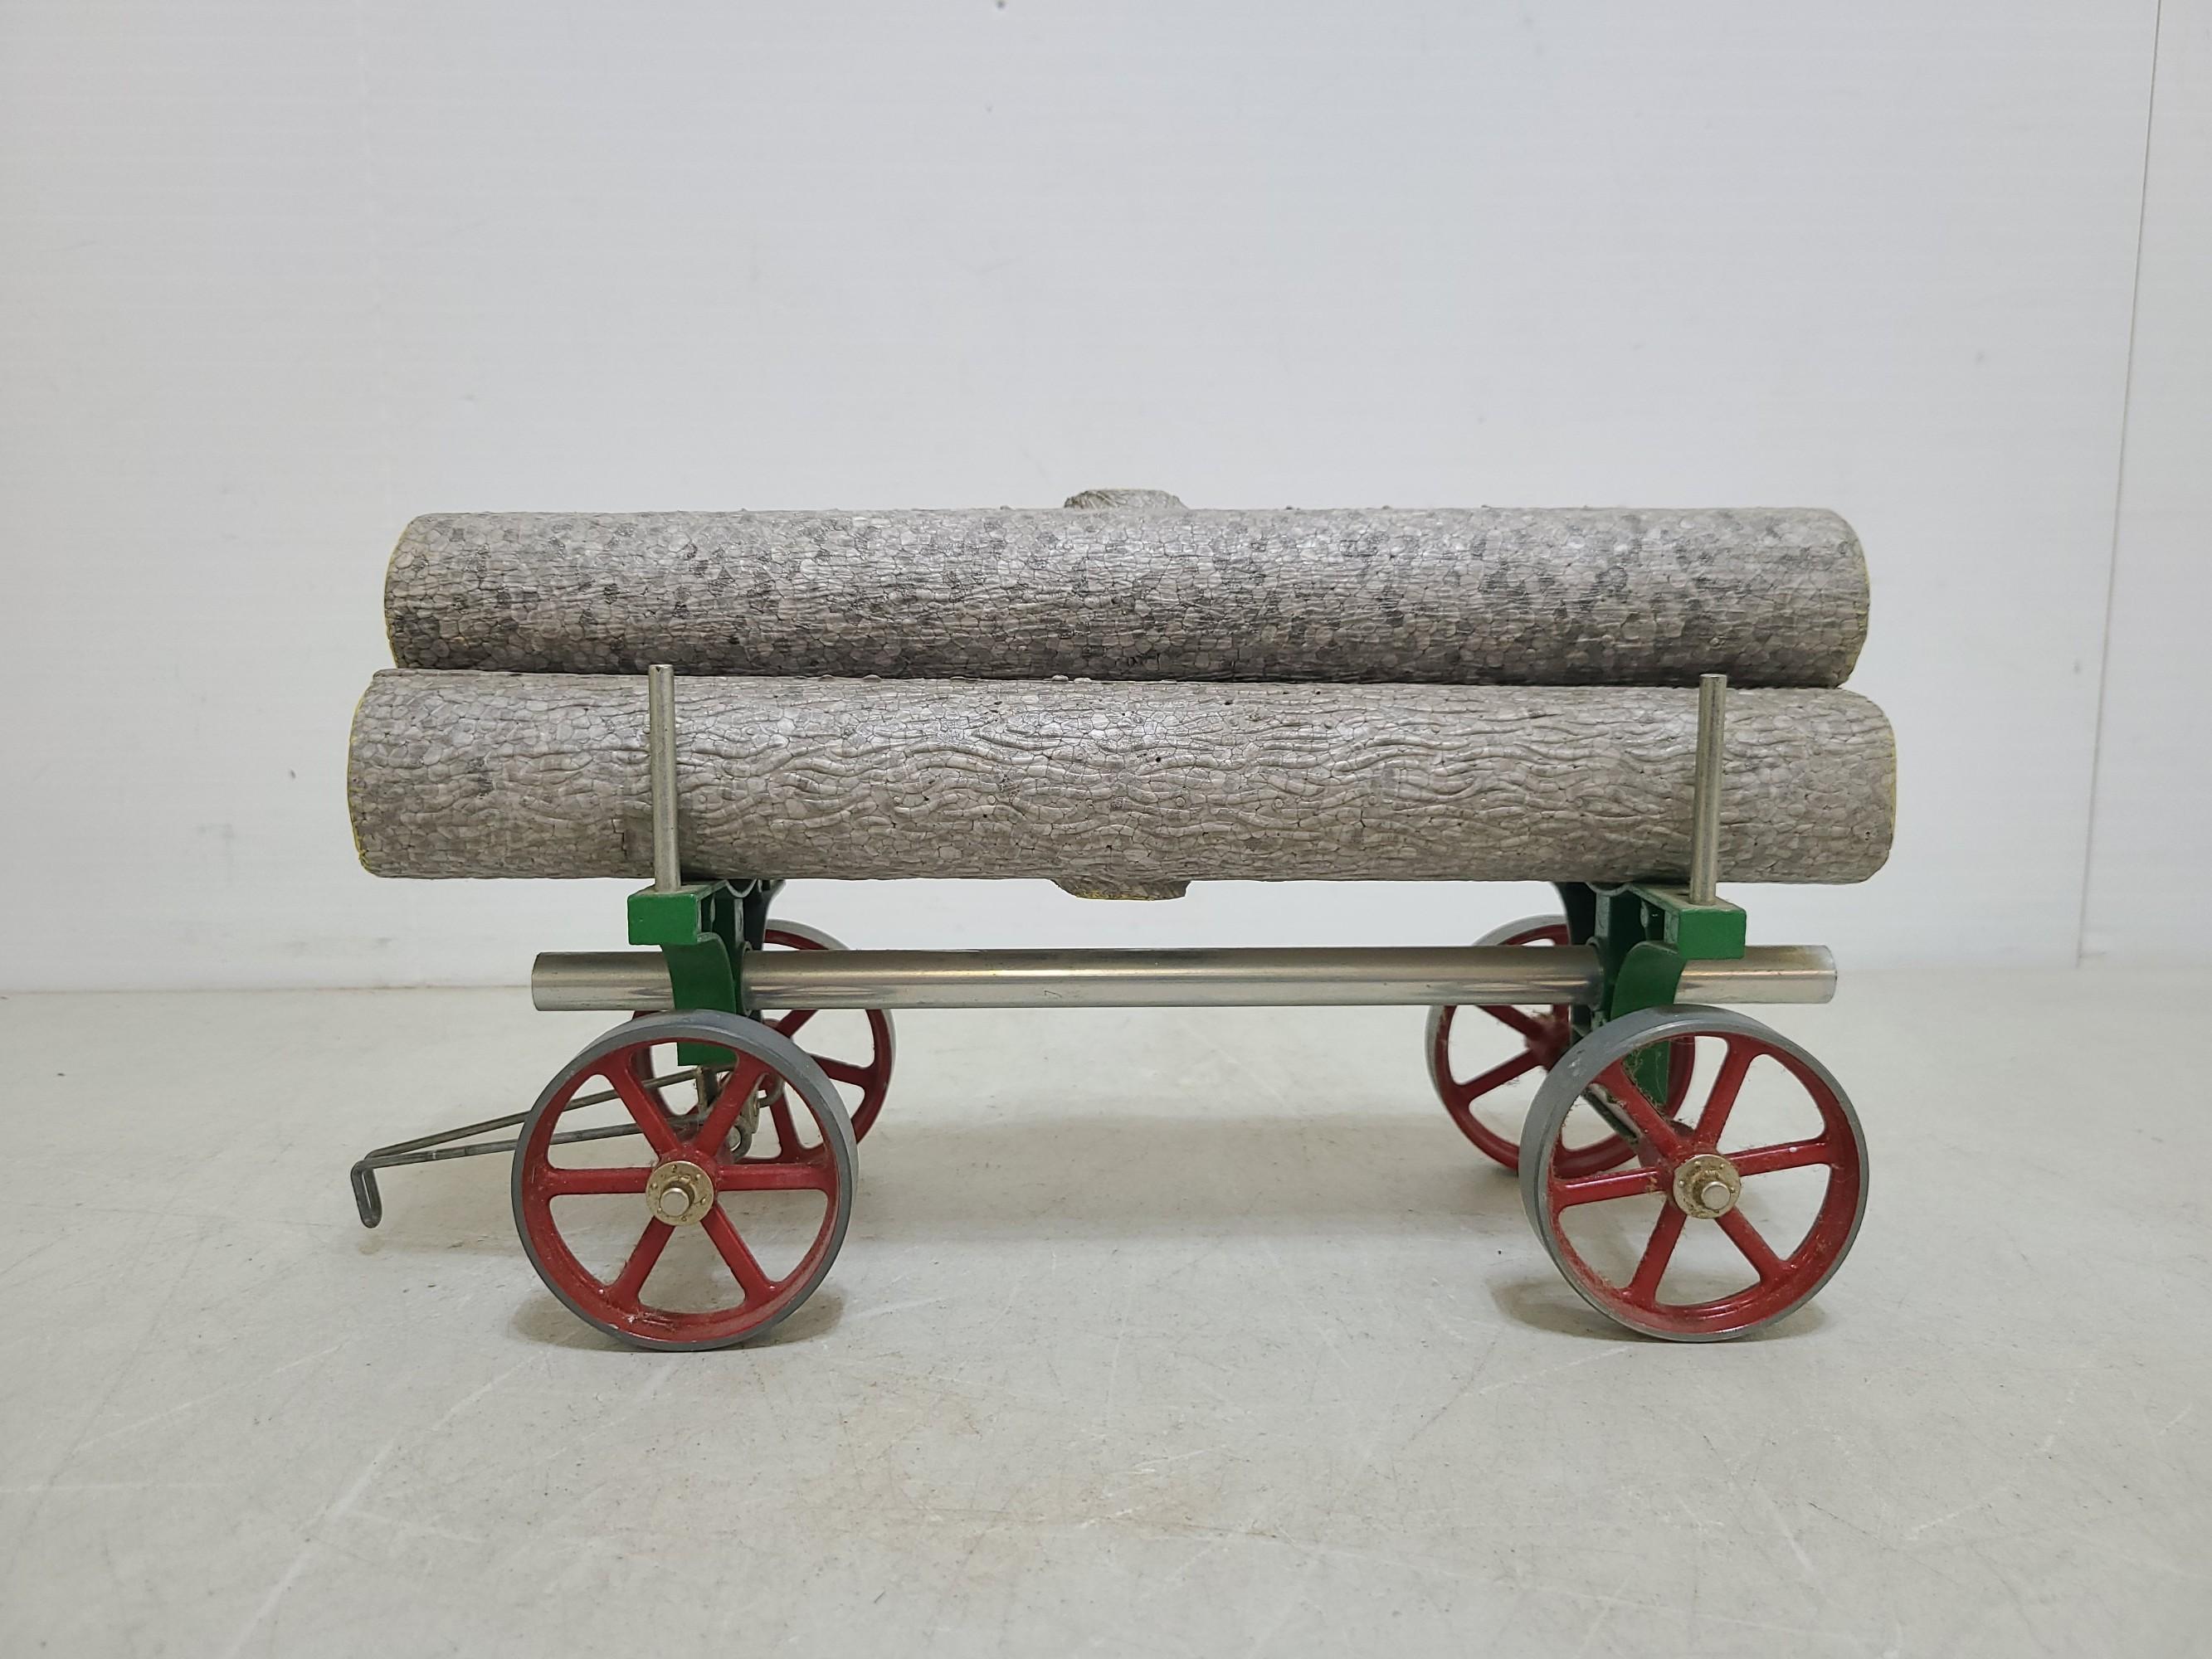 2 Mamod Wagons For Steam Tractor Toys